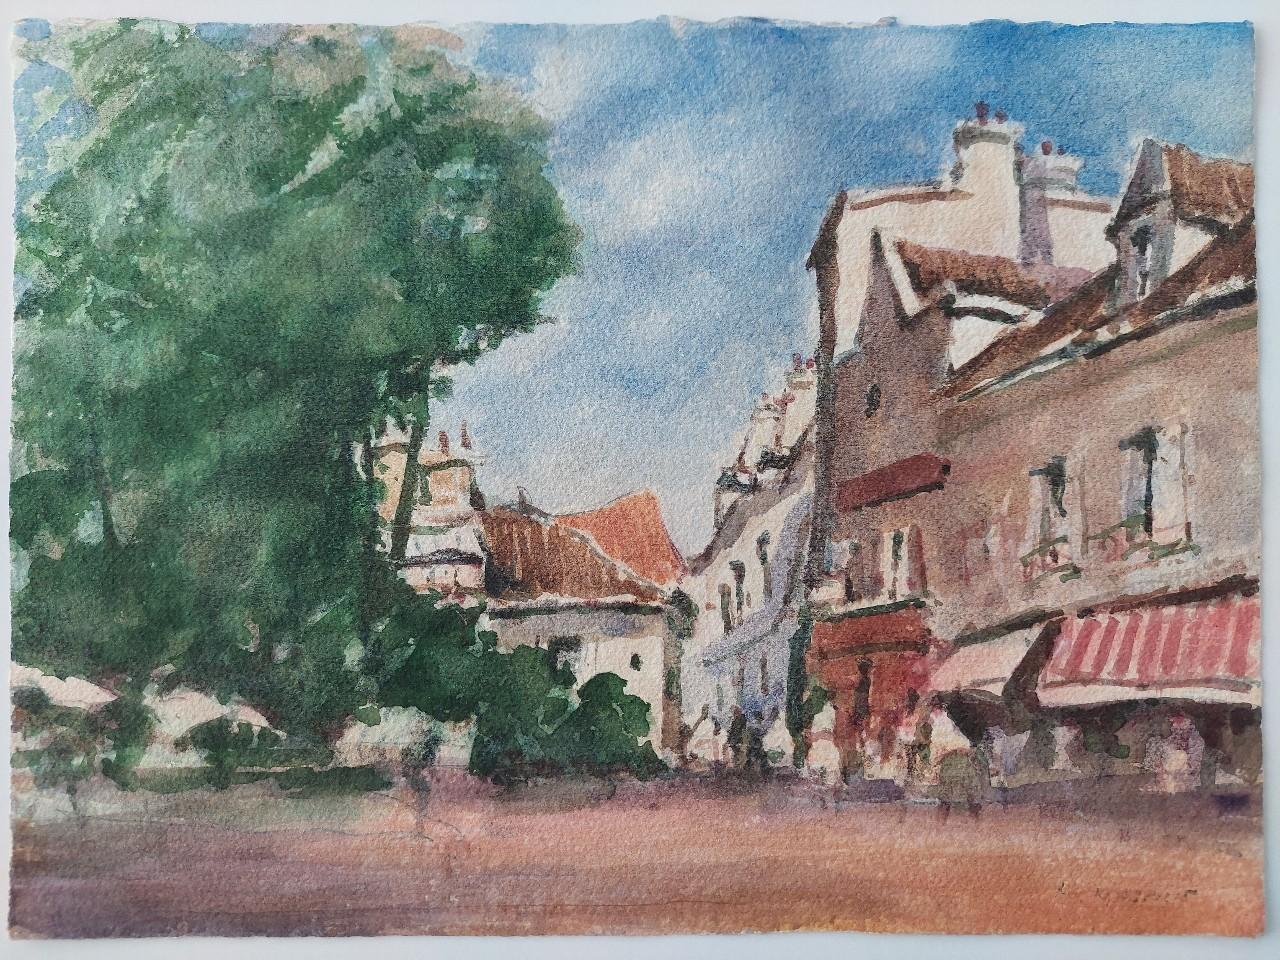 Summer Town Scene
by Maurice Mazeilie (French, 1924-2021)
watercolor painting on artist paper, unframed
signed lower right
stamped verso

painting: 14.75 inches x 10.75 inches

A delightful original painting by the 20th century French